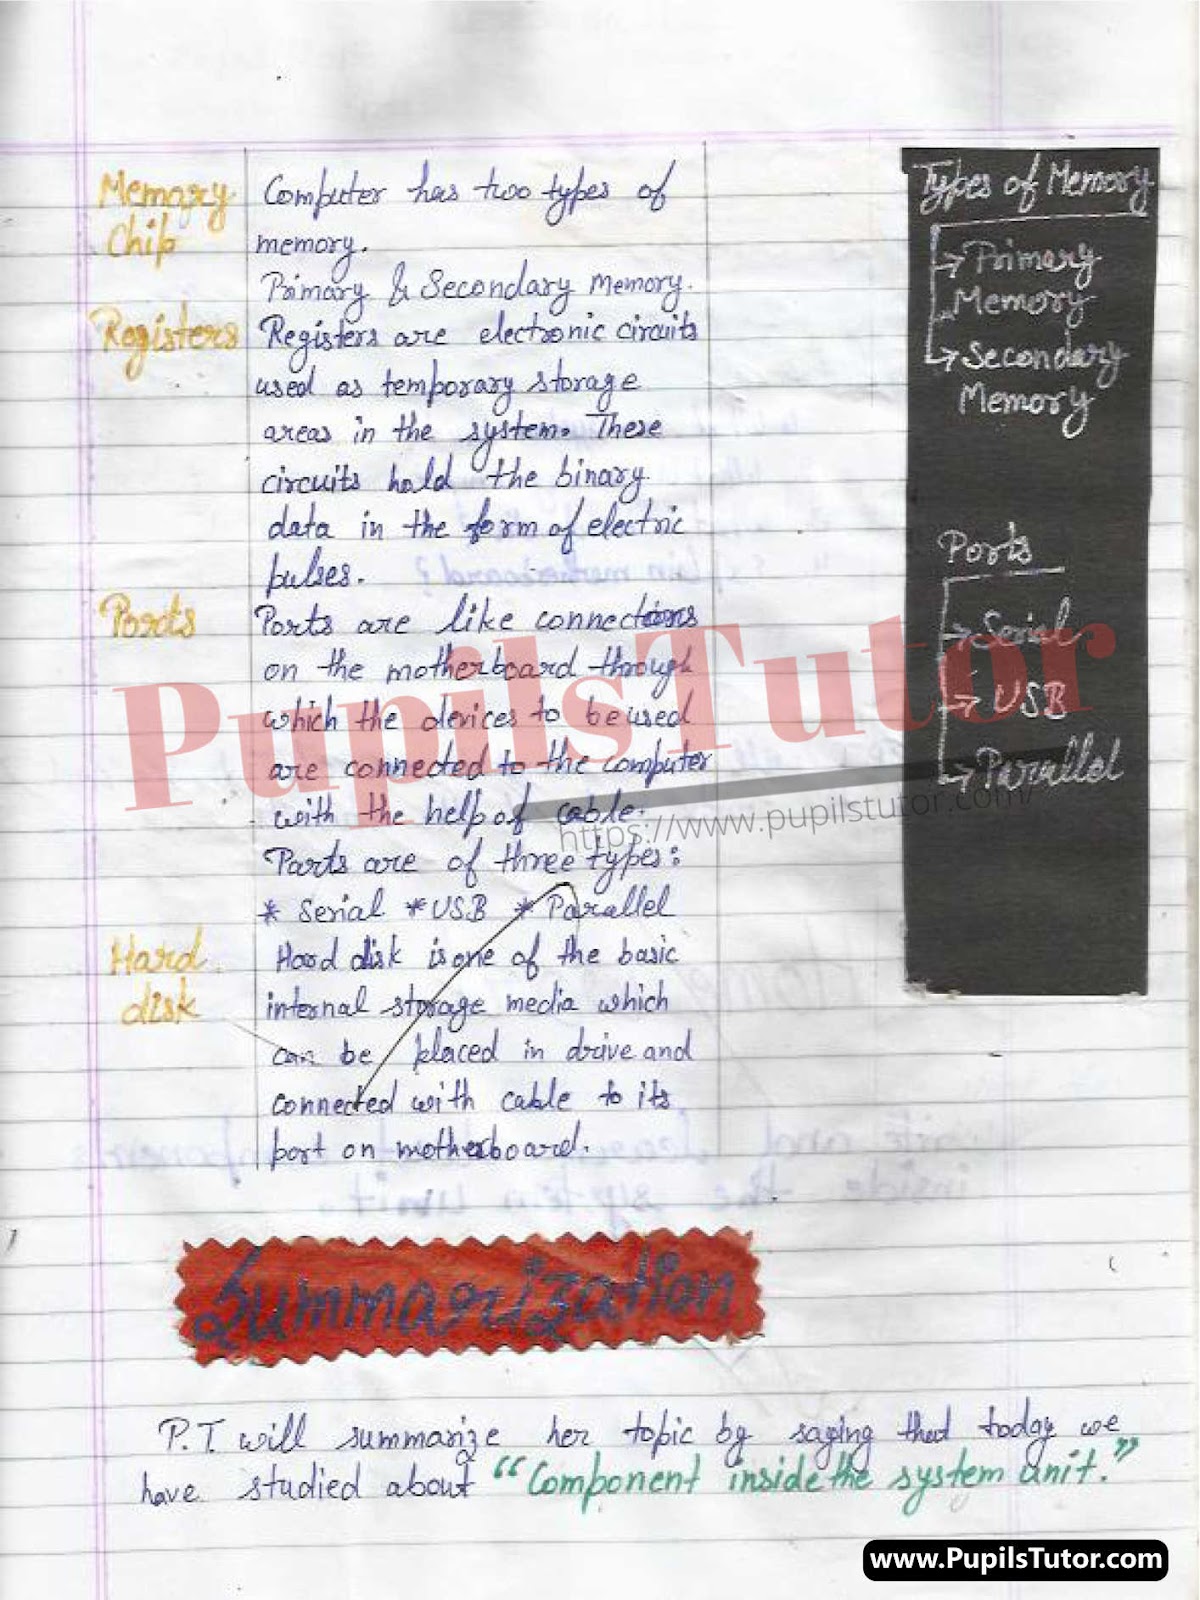 Lesson Plan On System Unit Of Computer For Class 11th.  – [Page And Pic Number 5] – https://www.pupilstutor.com/